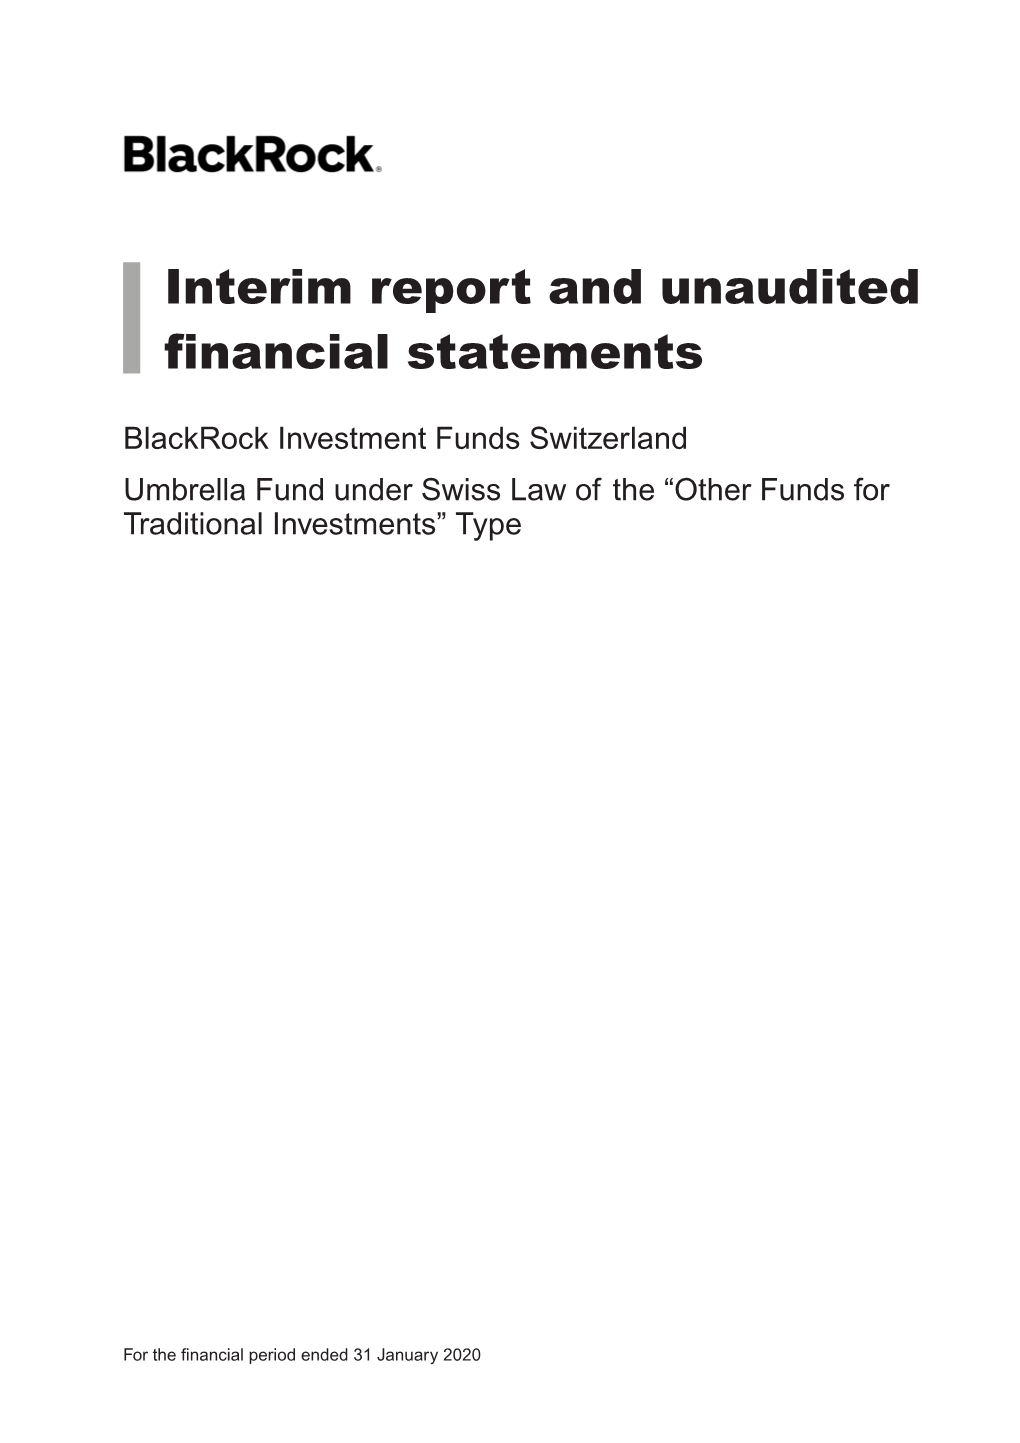 Interim Report and Unaudited Financial Statements